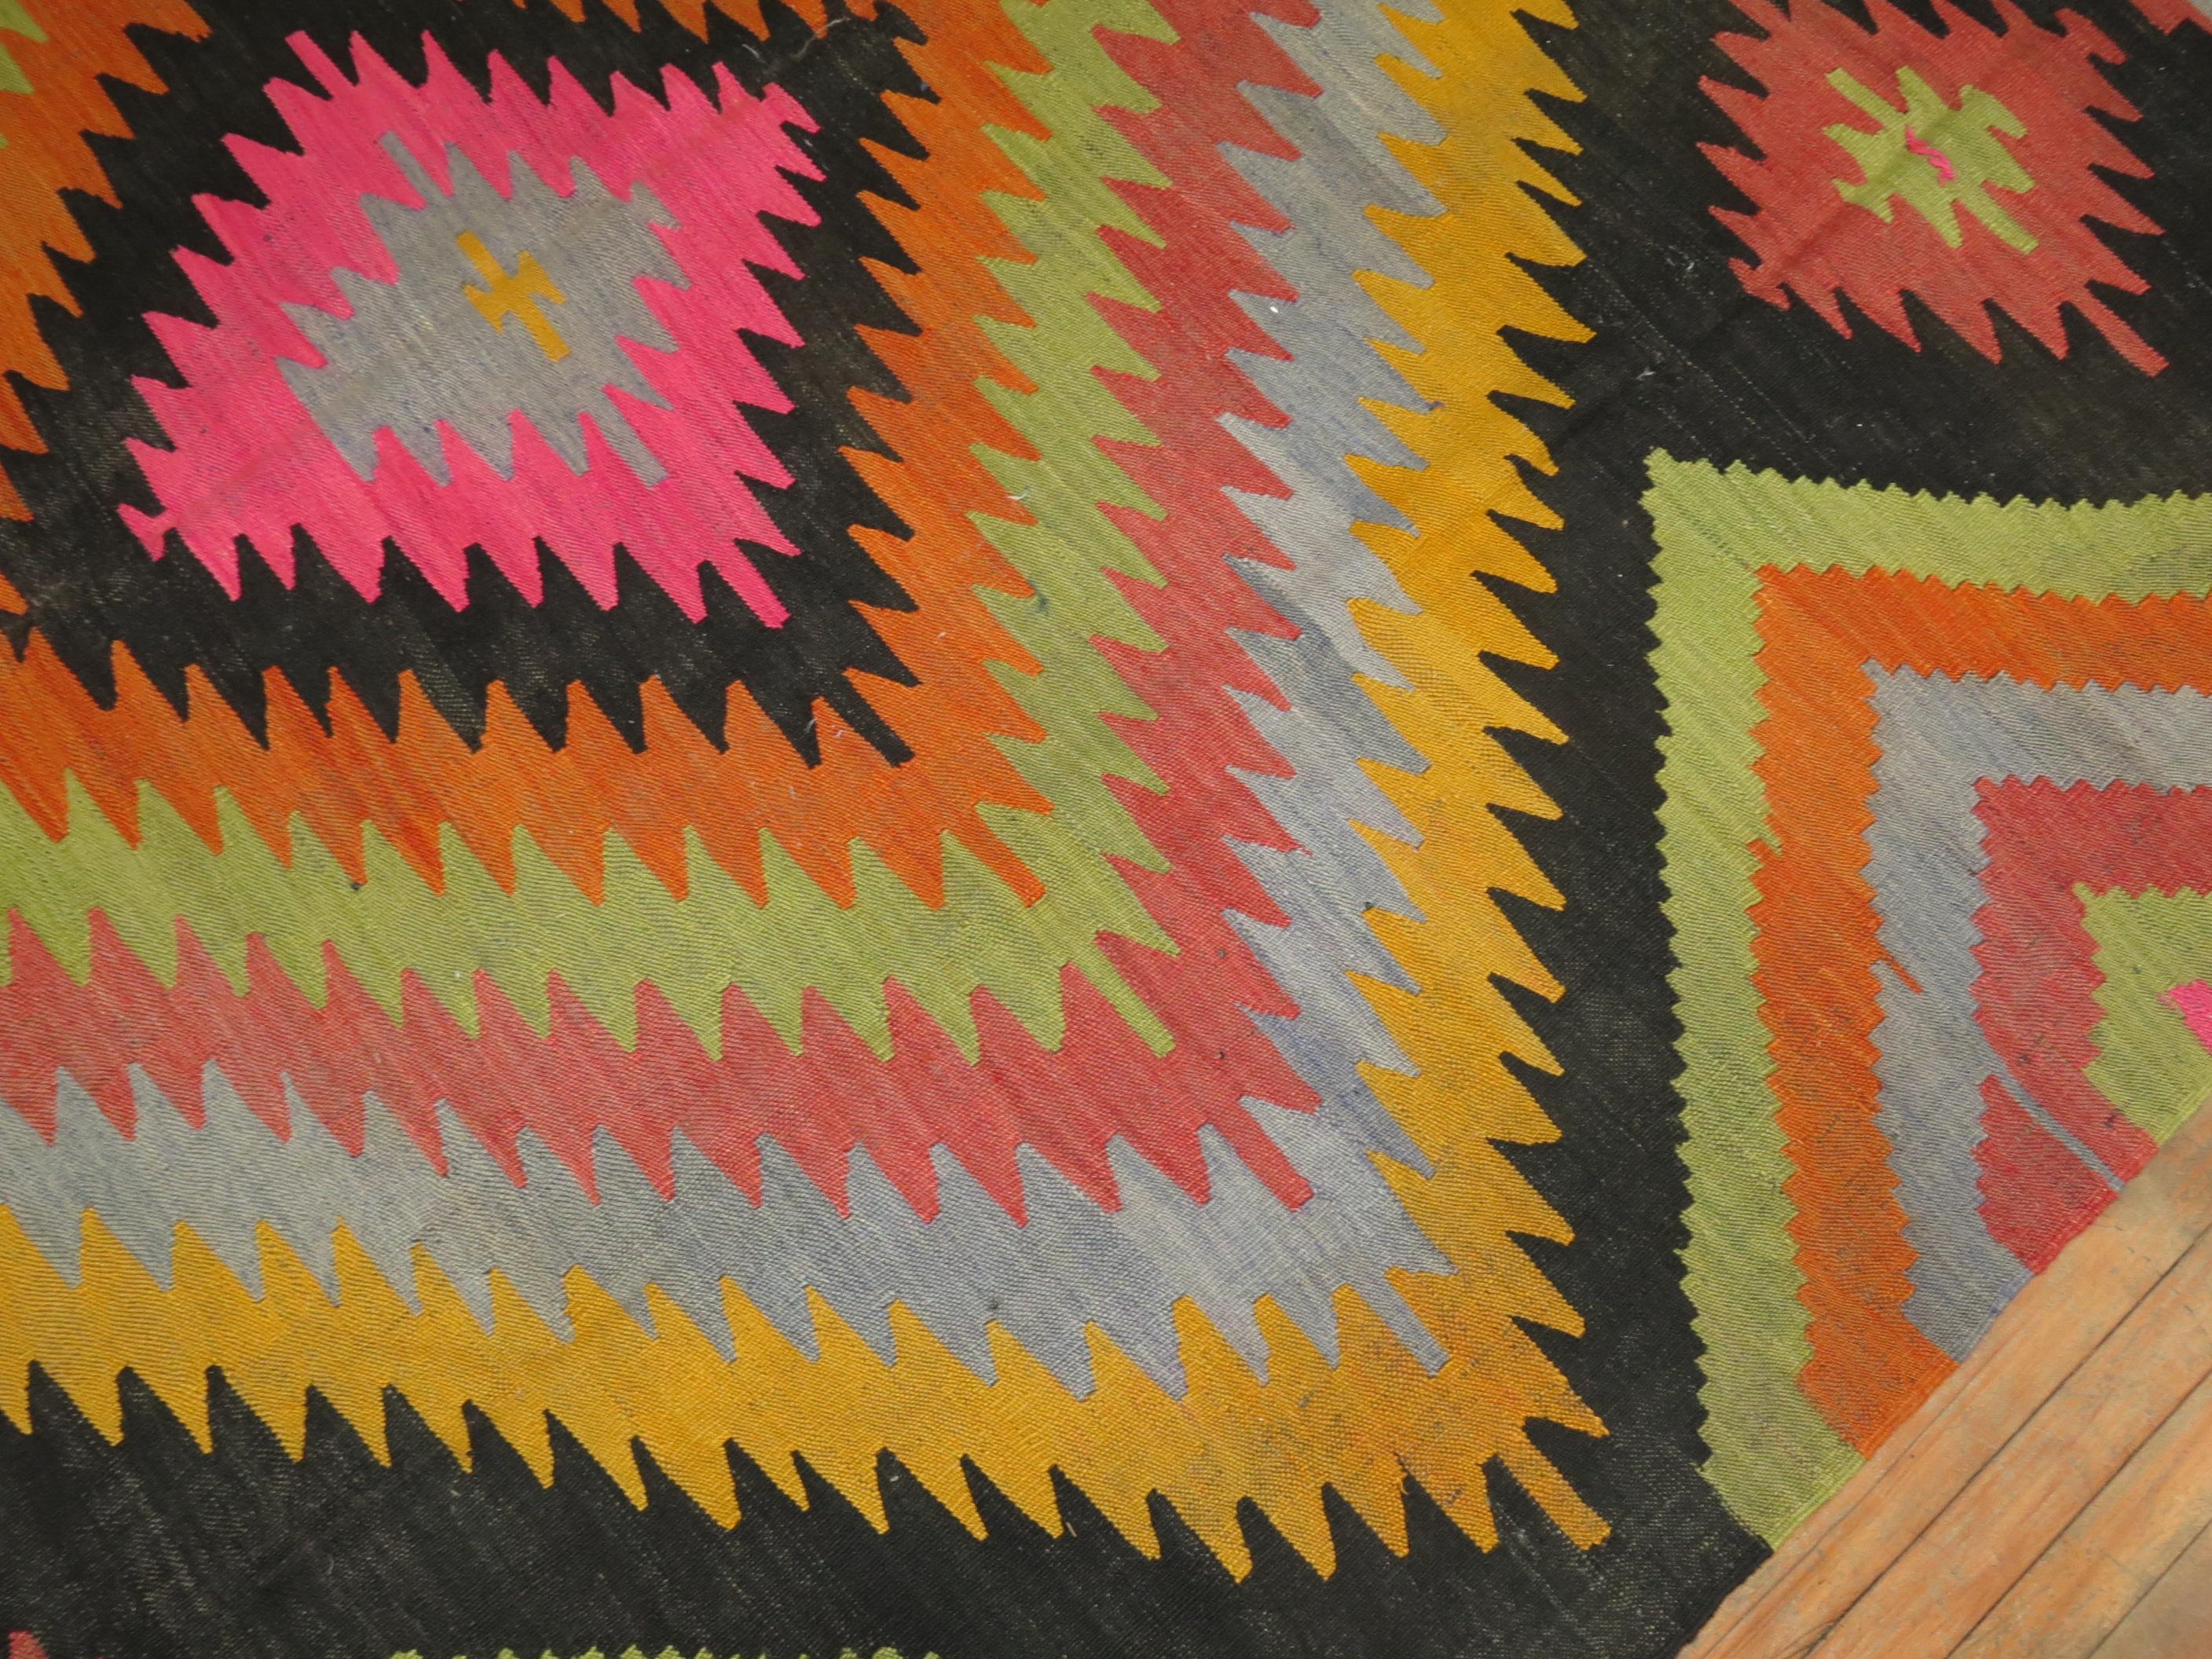 A dazzling midcentury room size Turkish Kilim flat-weave. Large scale design with intense colors on black field. A piece for the boho chic home

Measures: 8'2” x 10'10”.